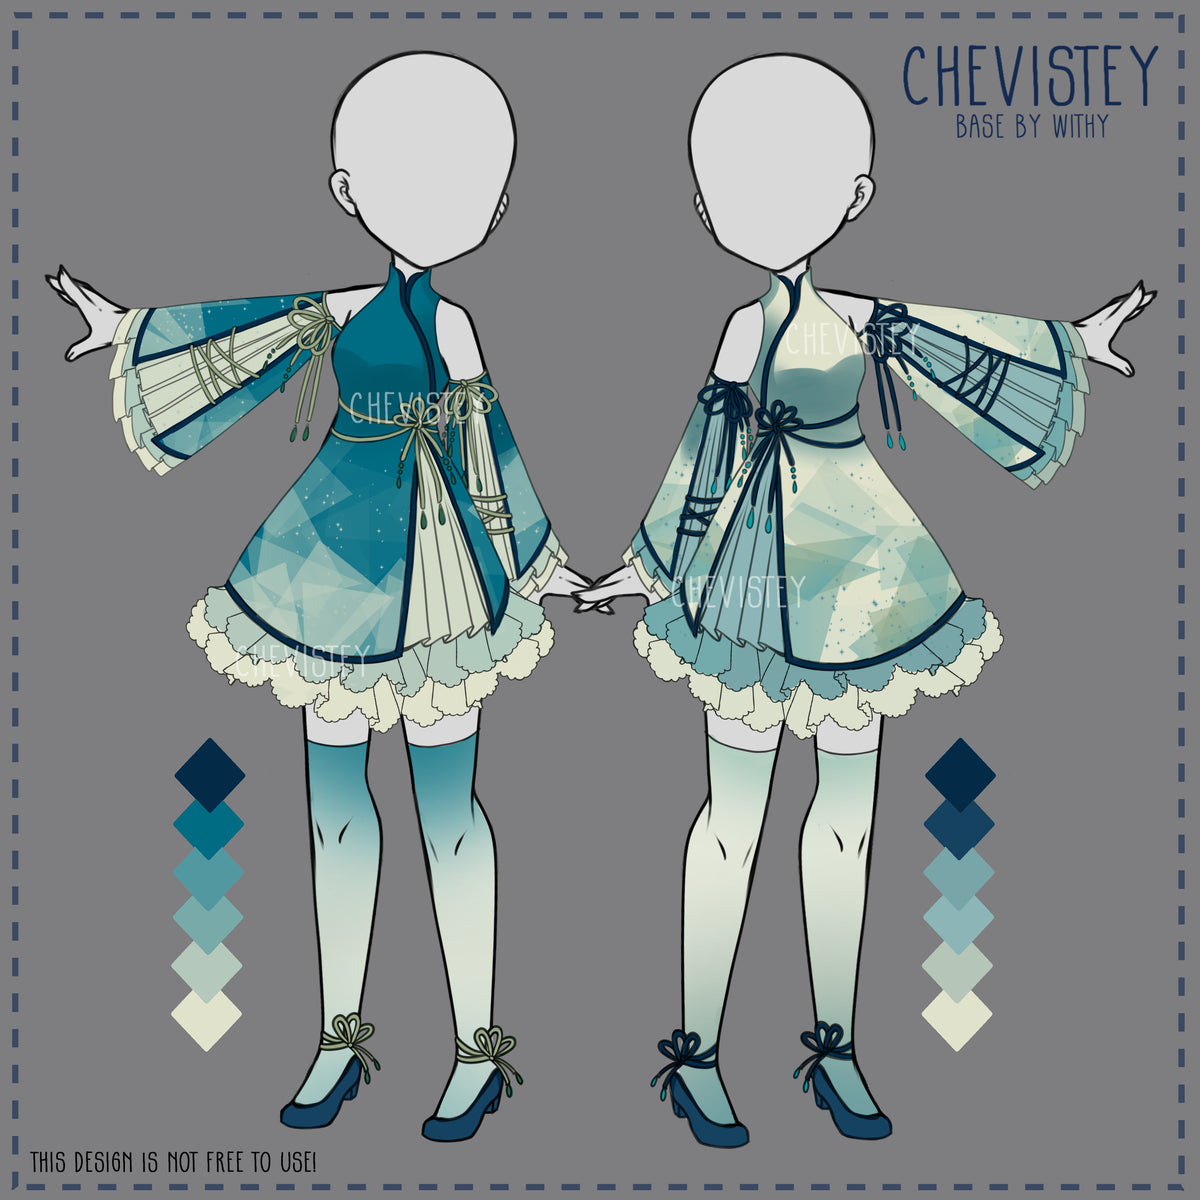 Outfit Adoptable [Twin Dress] – Chevistey